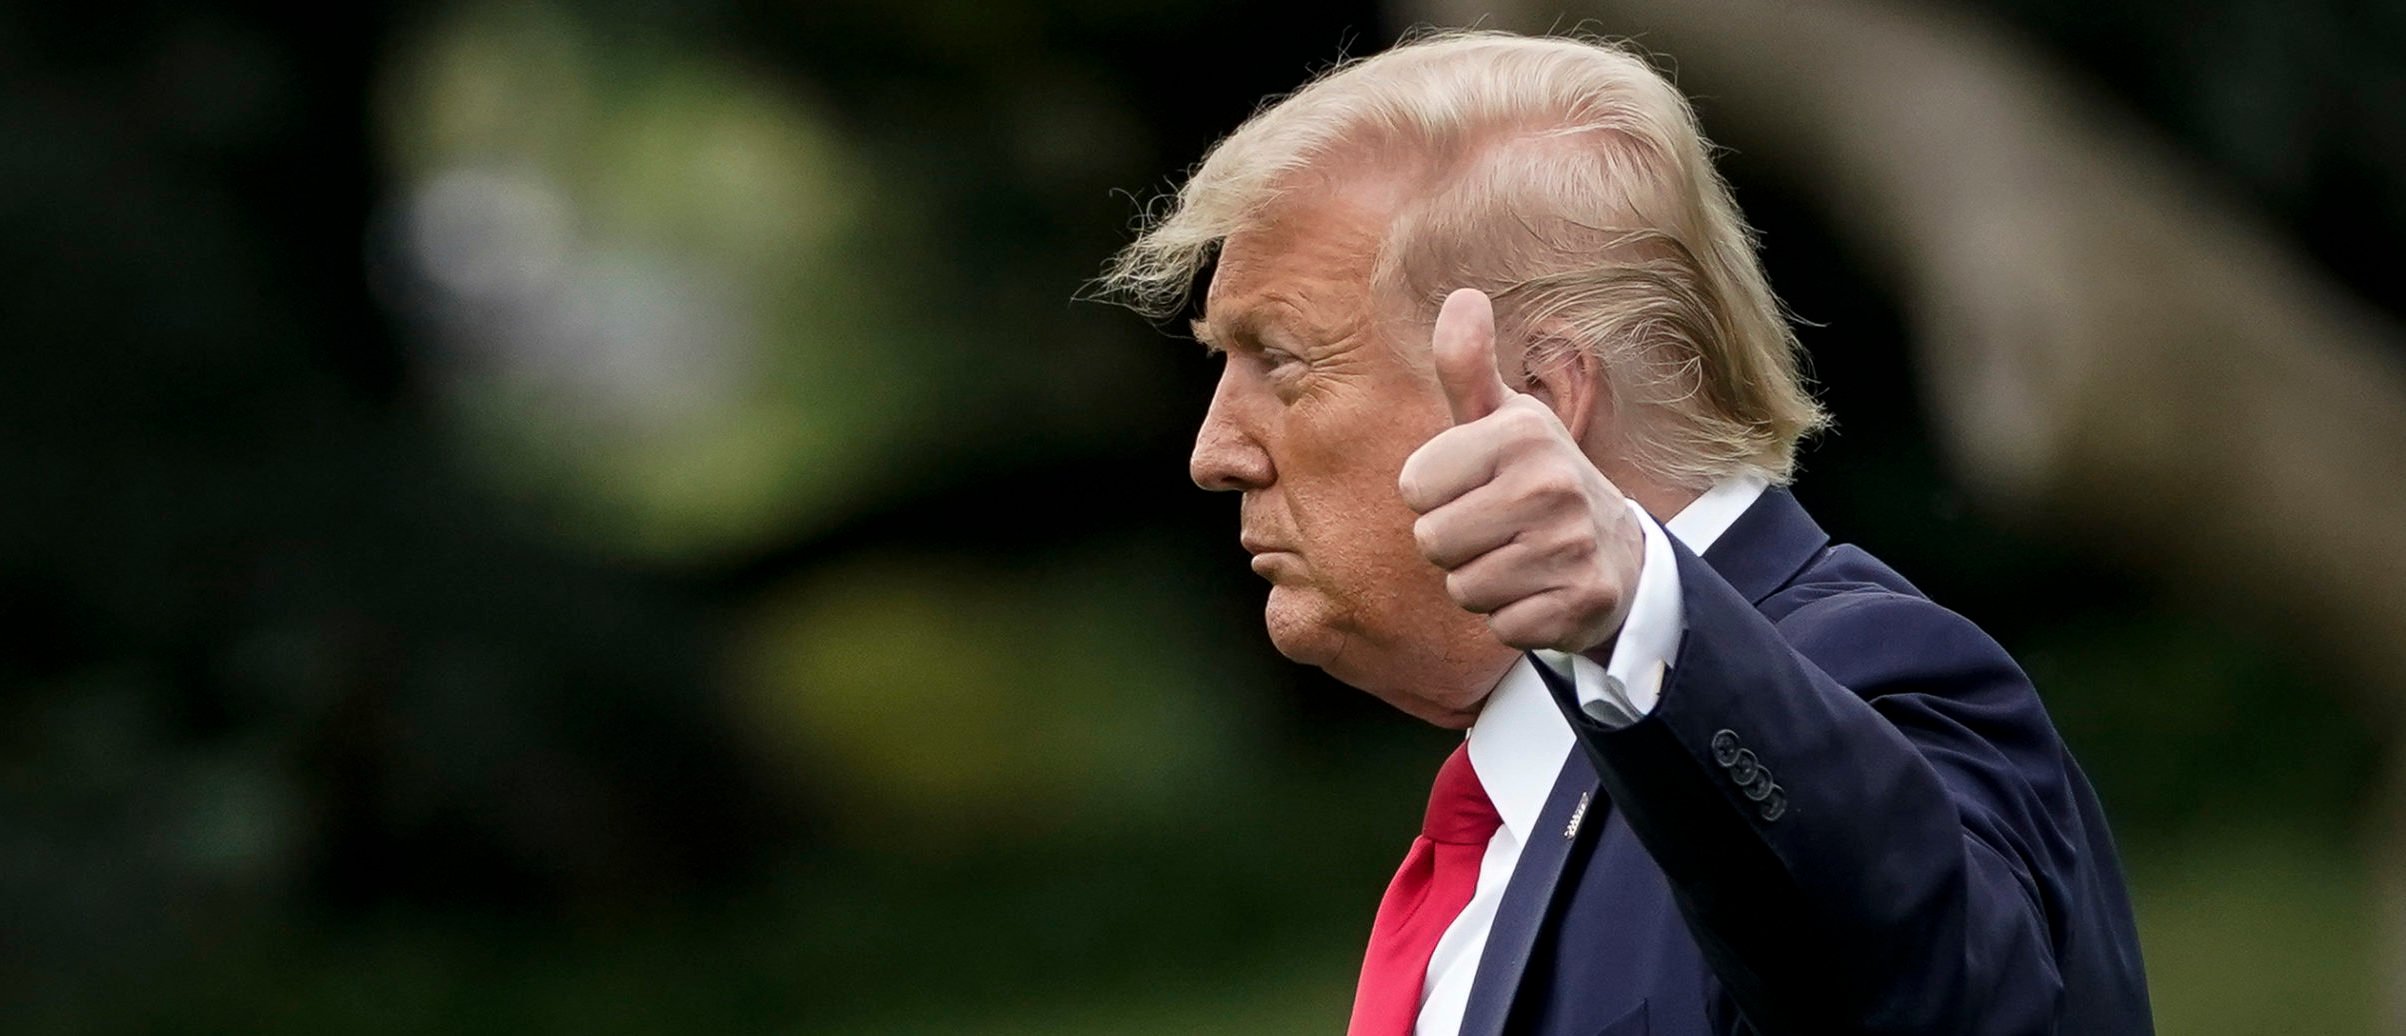 Trump Overtakes Biden, Reaches New Approval High In Latest Rasmussen